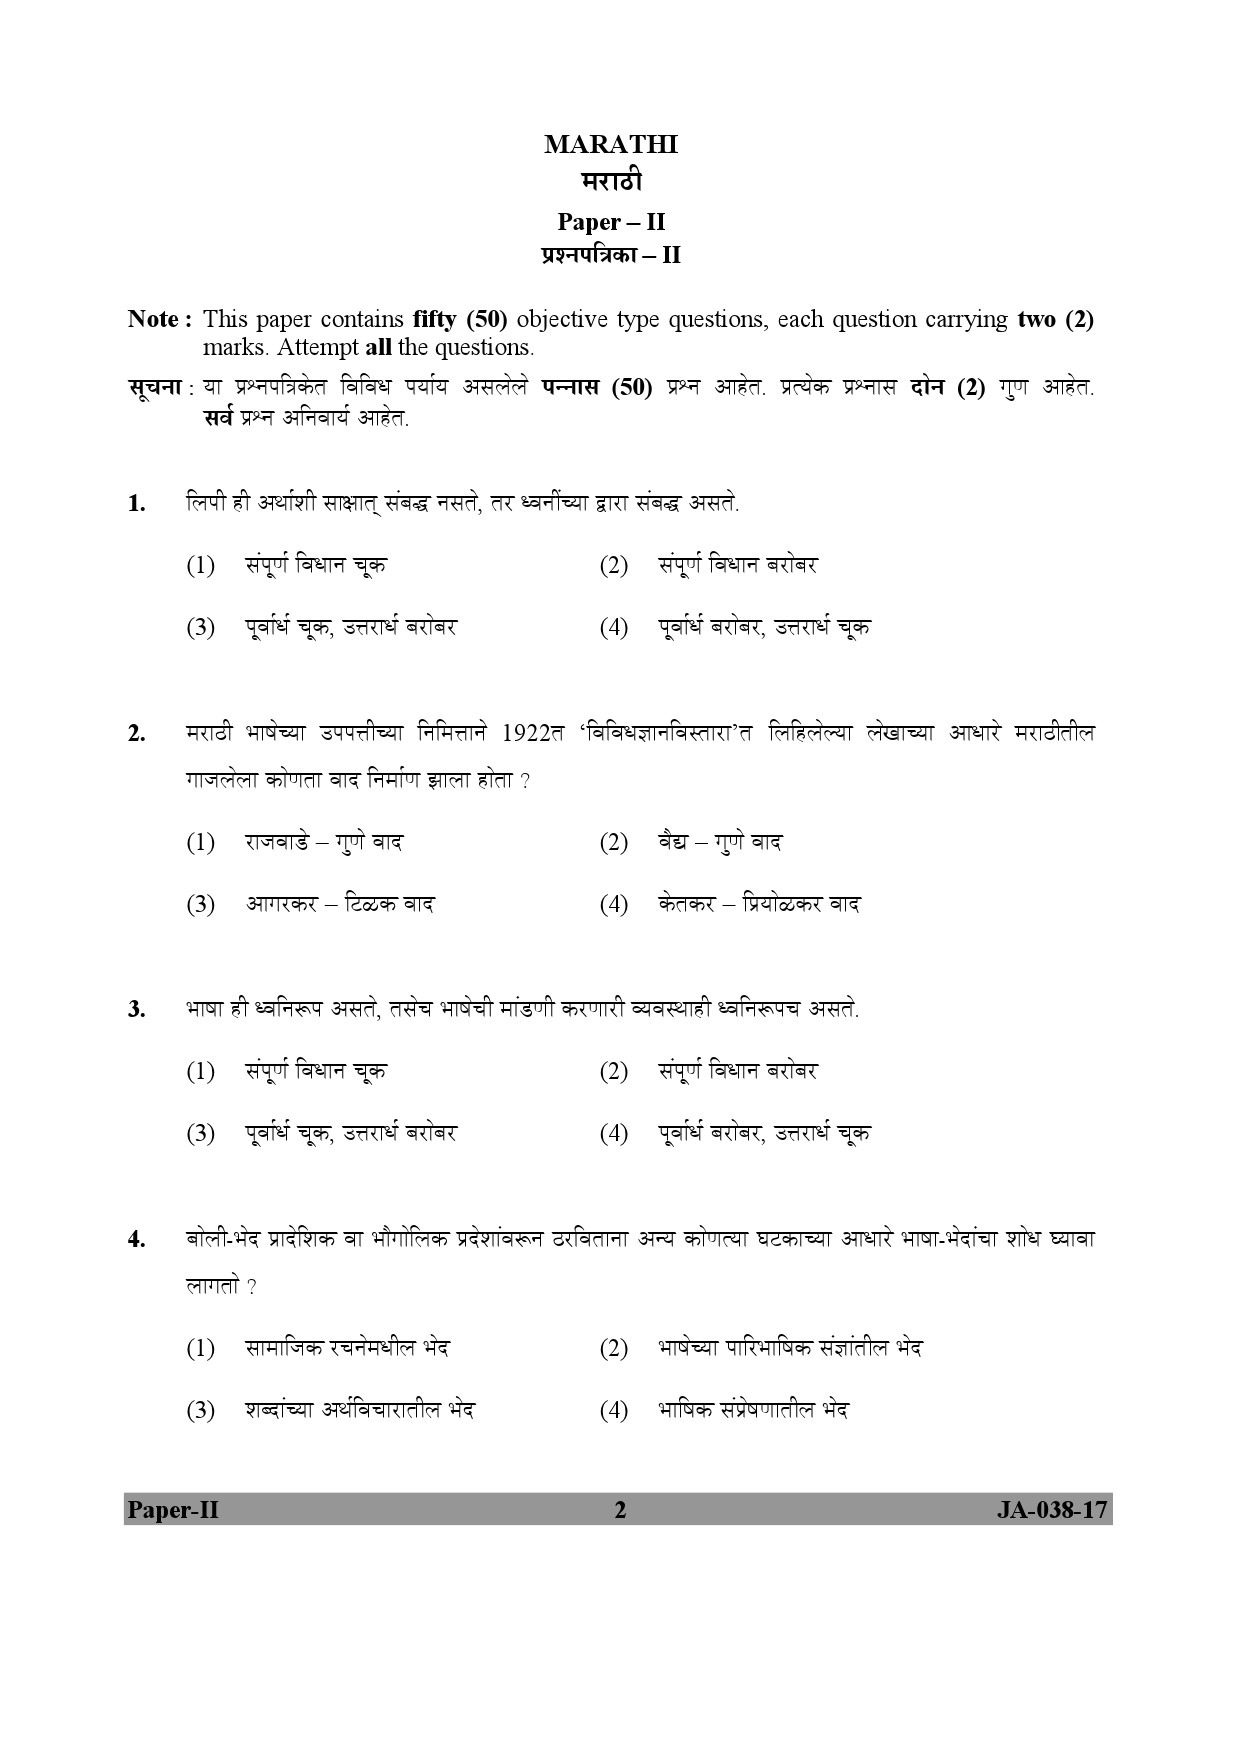 Marathi Question Paper Ii January Ugc Net Previous Question Papers 144144 Hot Sex Picture 7314